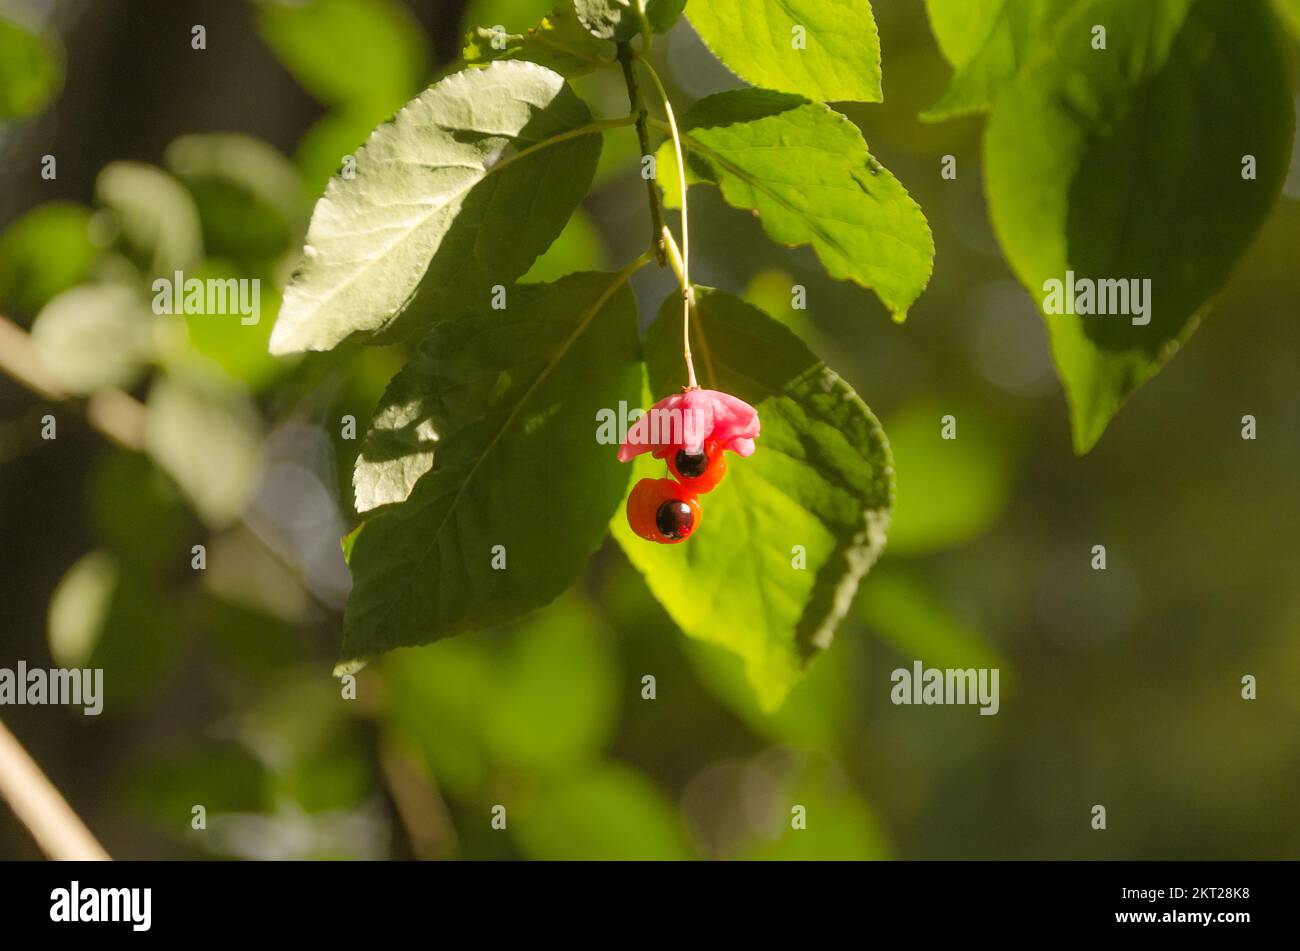 They See You. Euonymus Verrucosus Fruit in Natural Environment Берескле́т Stock Photo